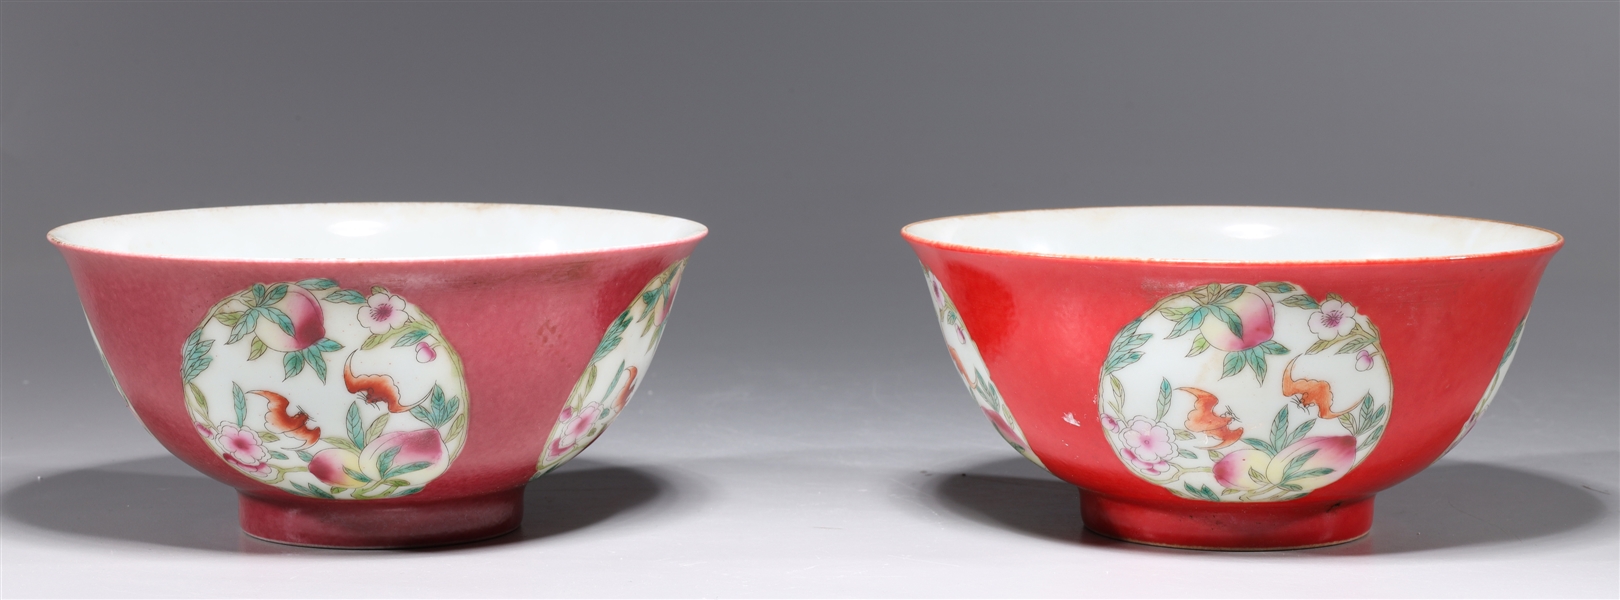 Two Chinese Red & Pink Porcelain Bowls